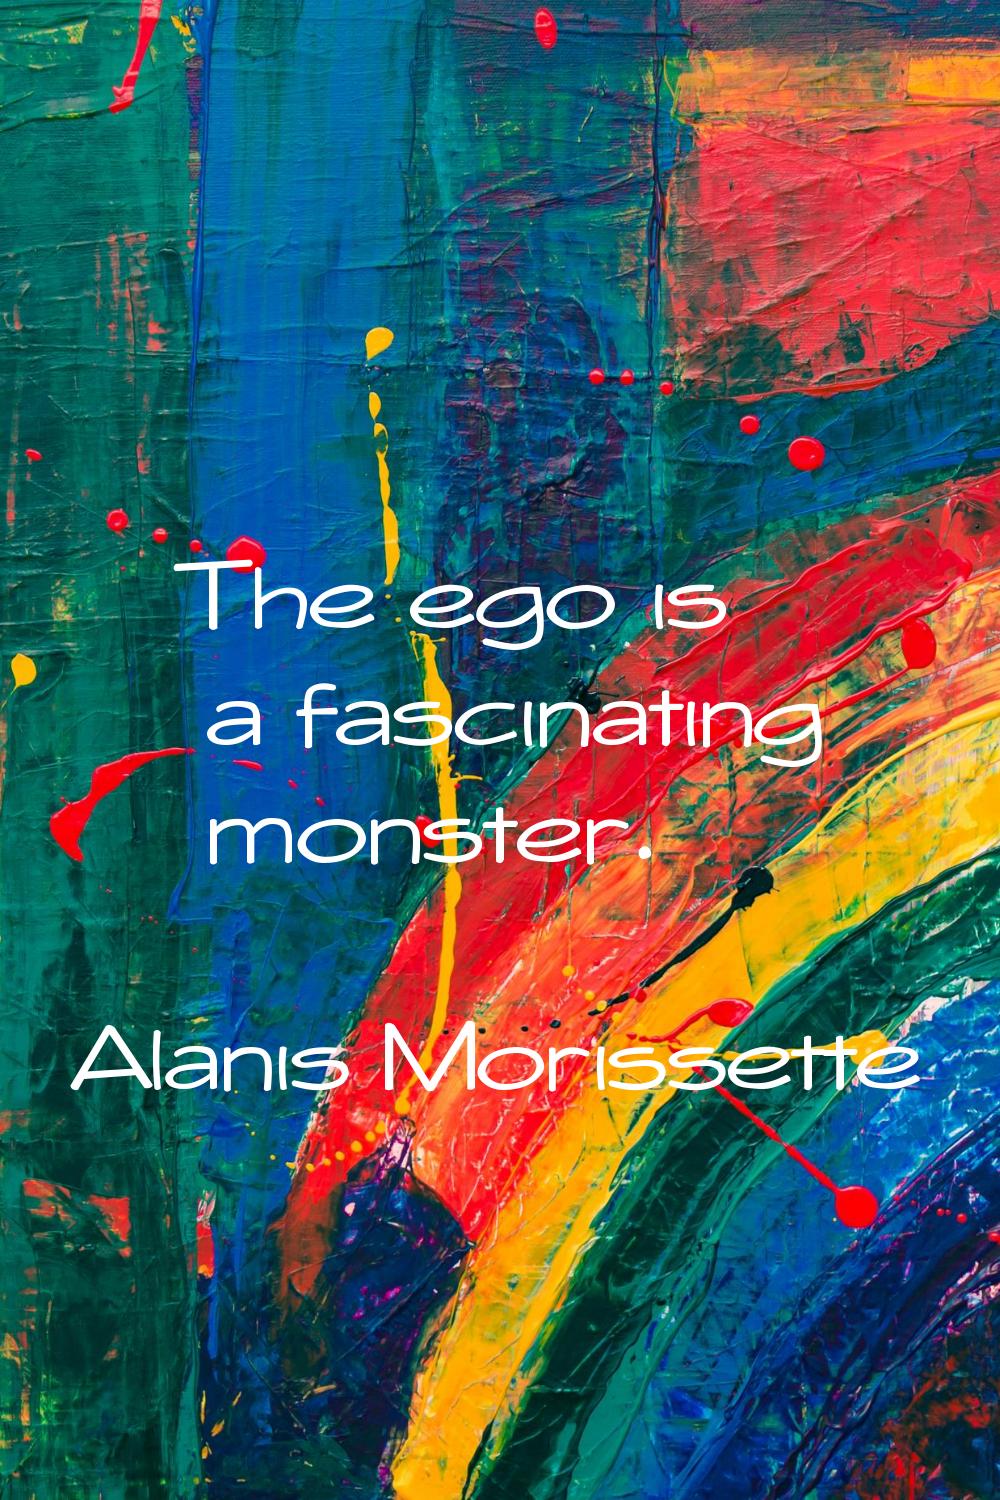 The ego is a fascinating monster.